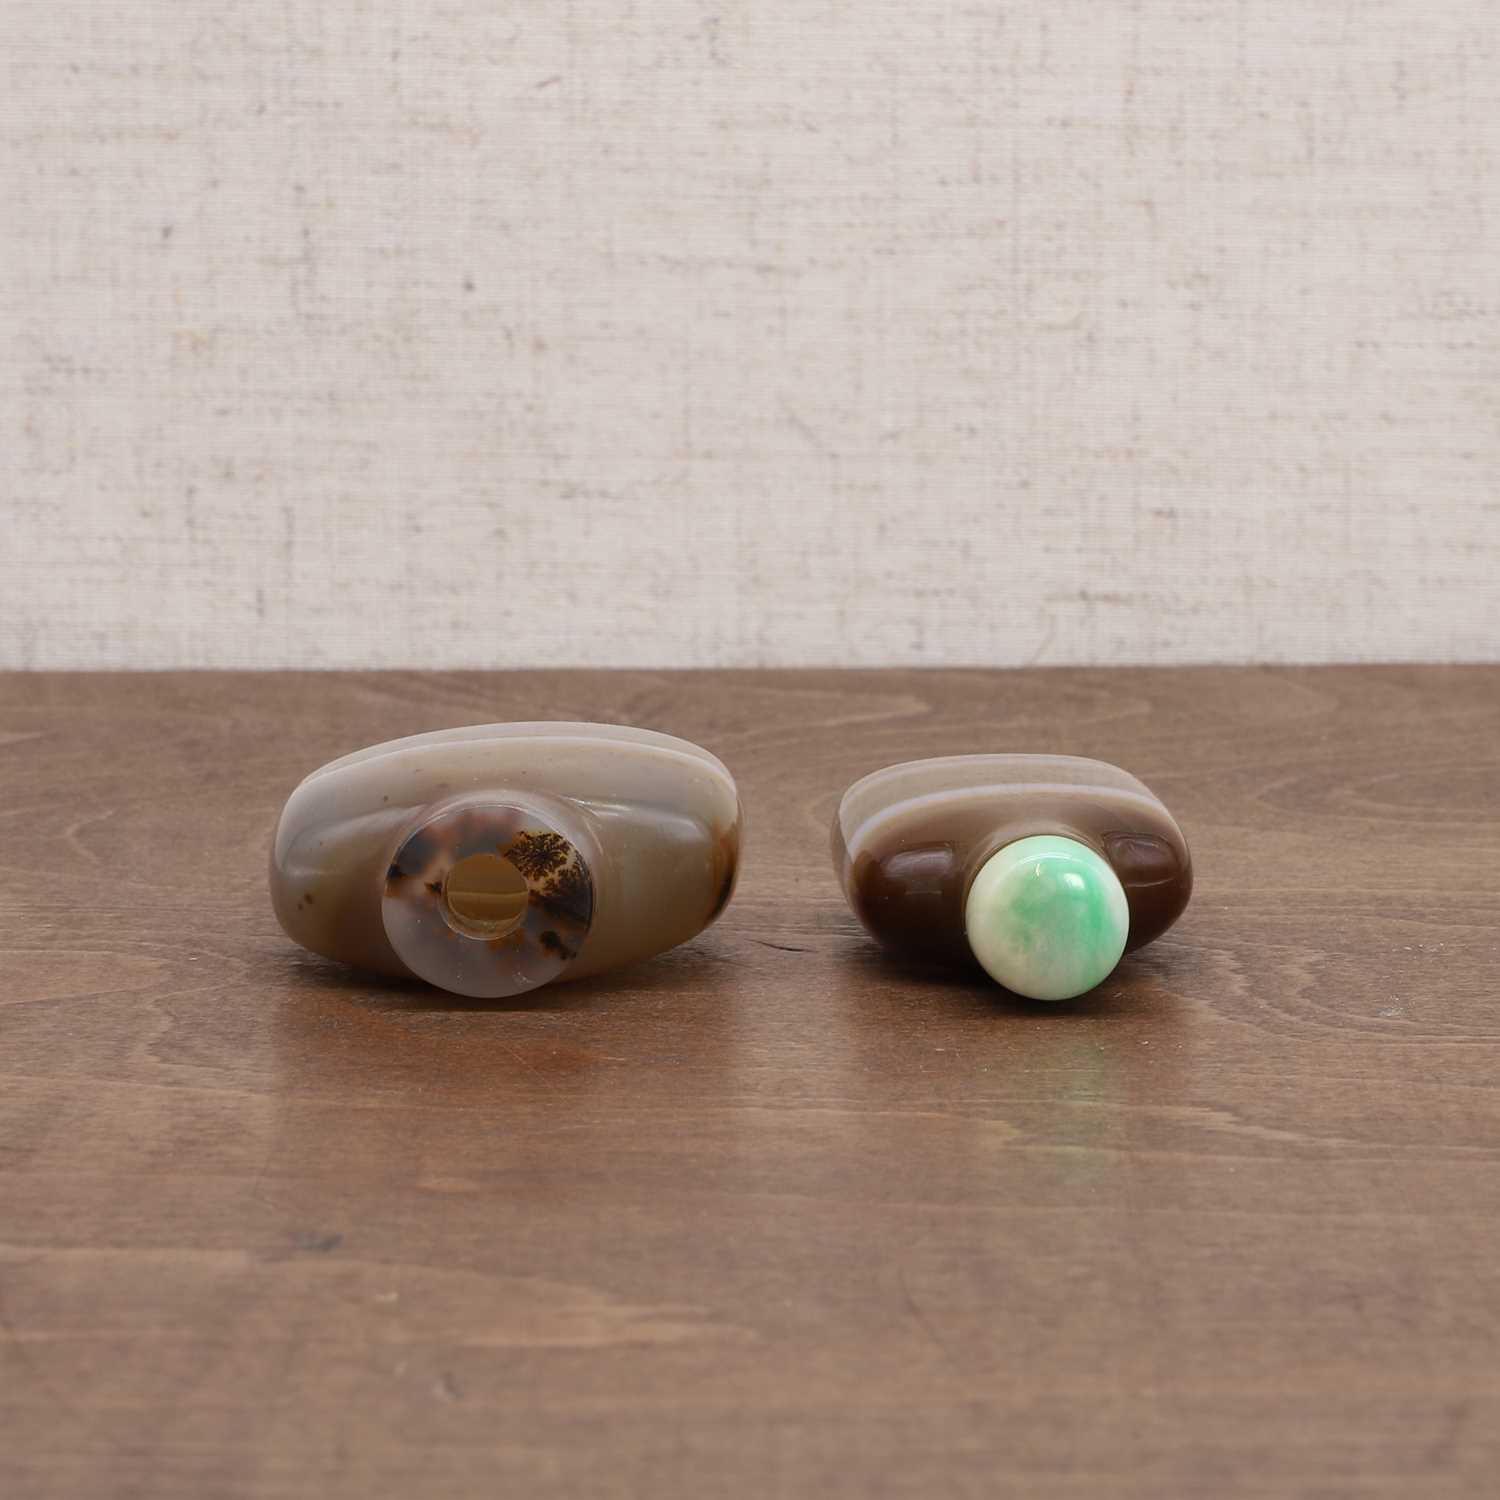 Two Chinese agate snuff bottles, - Image 7 of 7